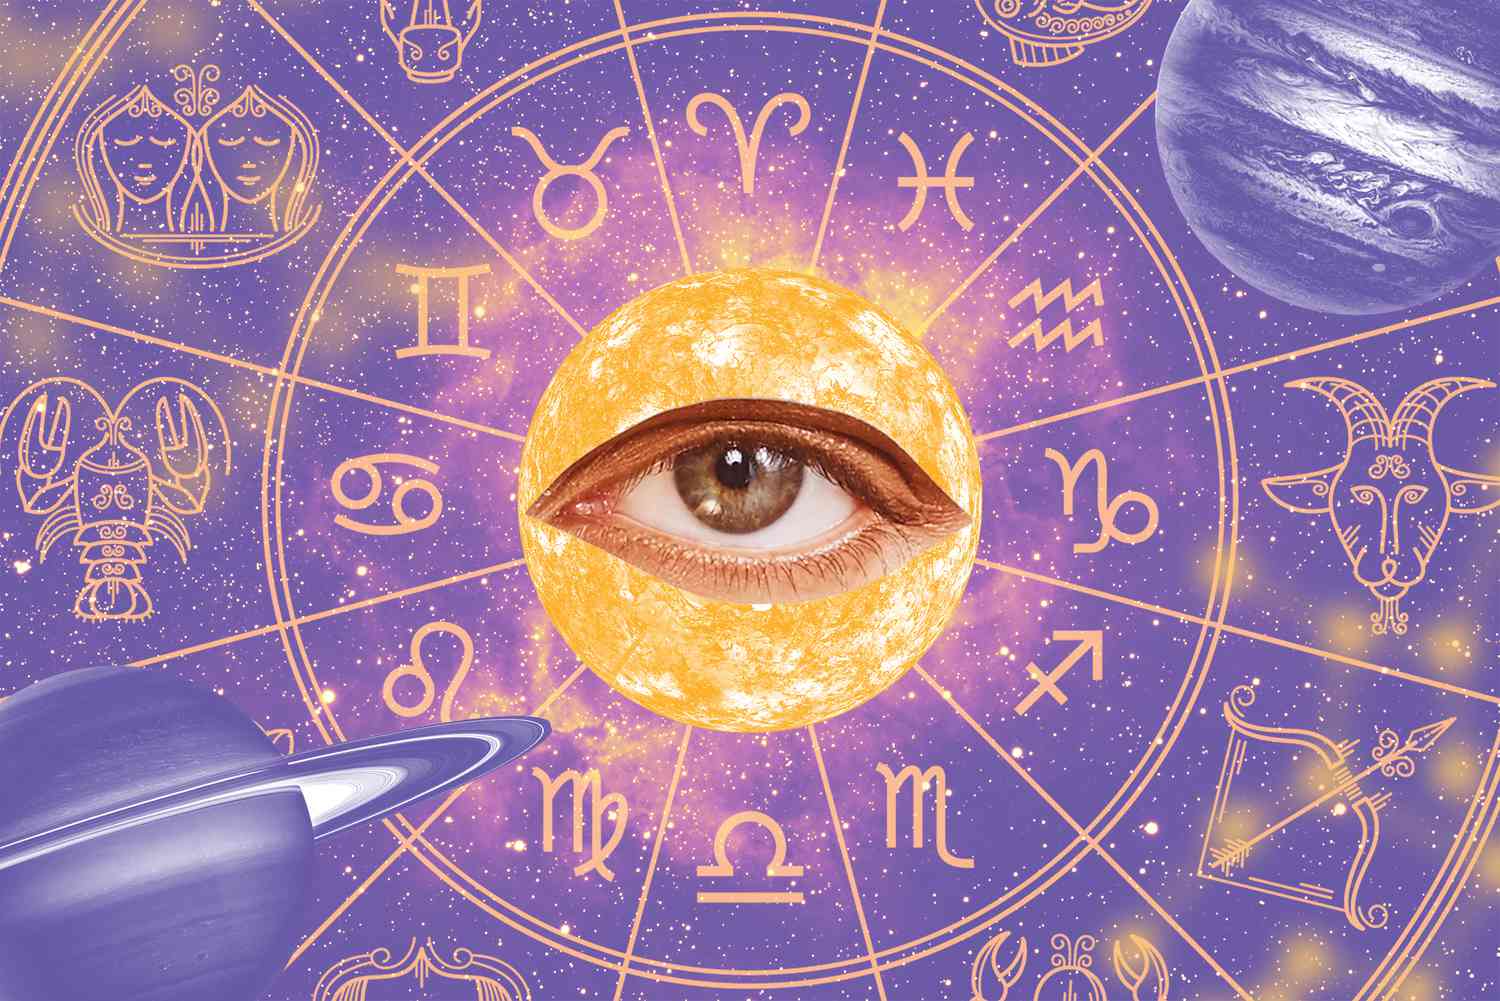 Test Your Knowledge of Astrology!